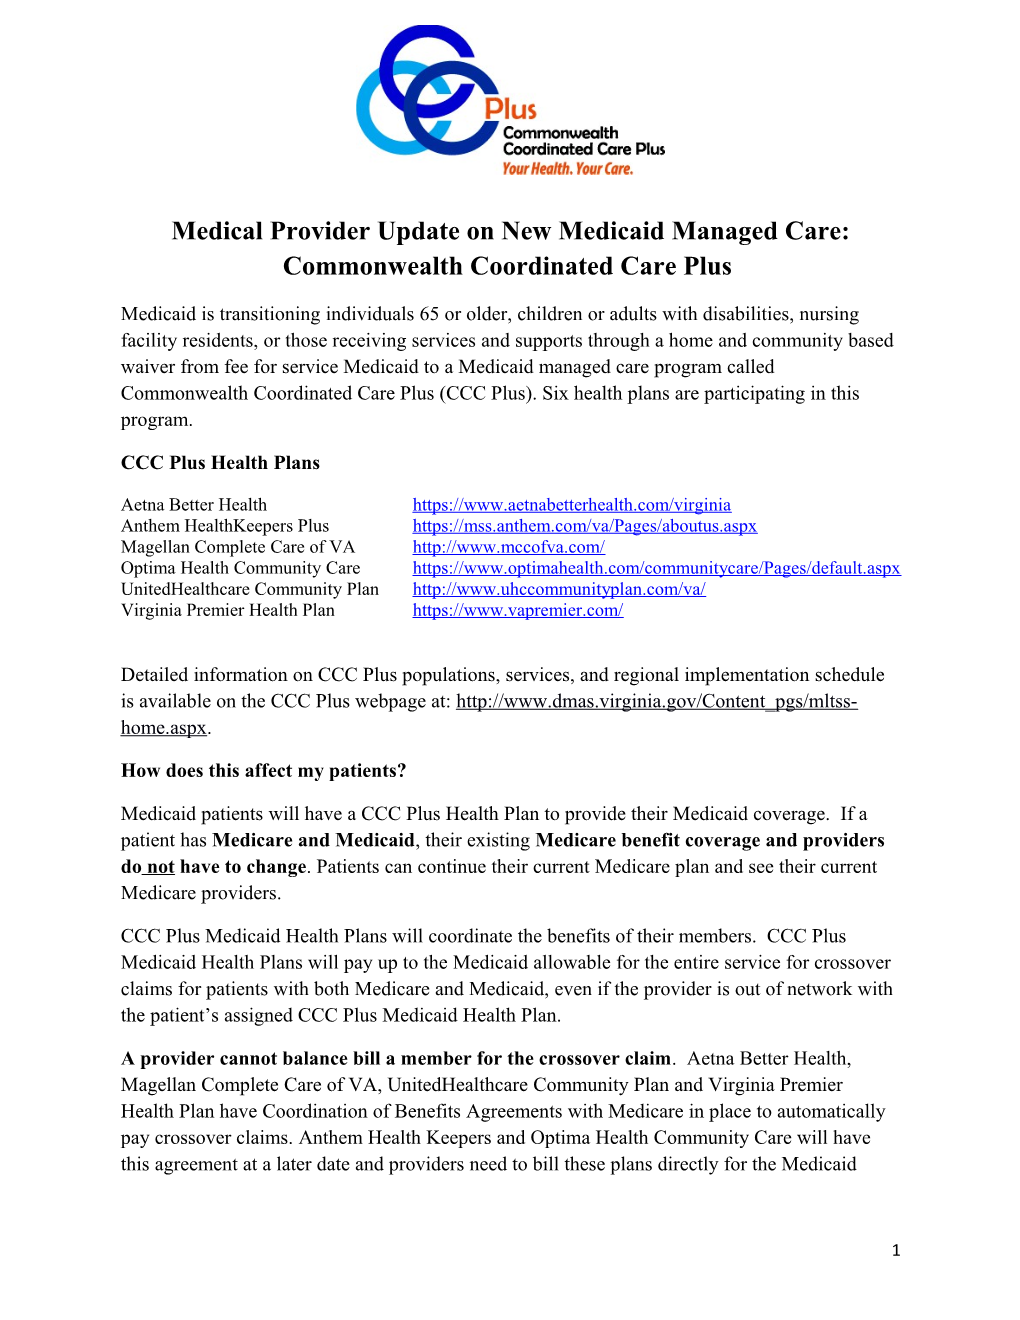 Medical Provider Update on New Medicaid Managed Care: Commonwealth Coordinated Care Plus